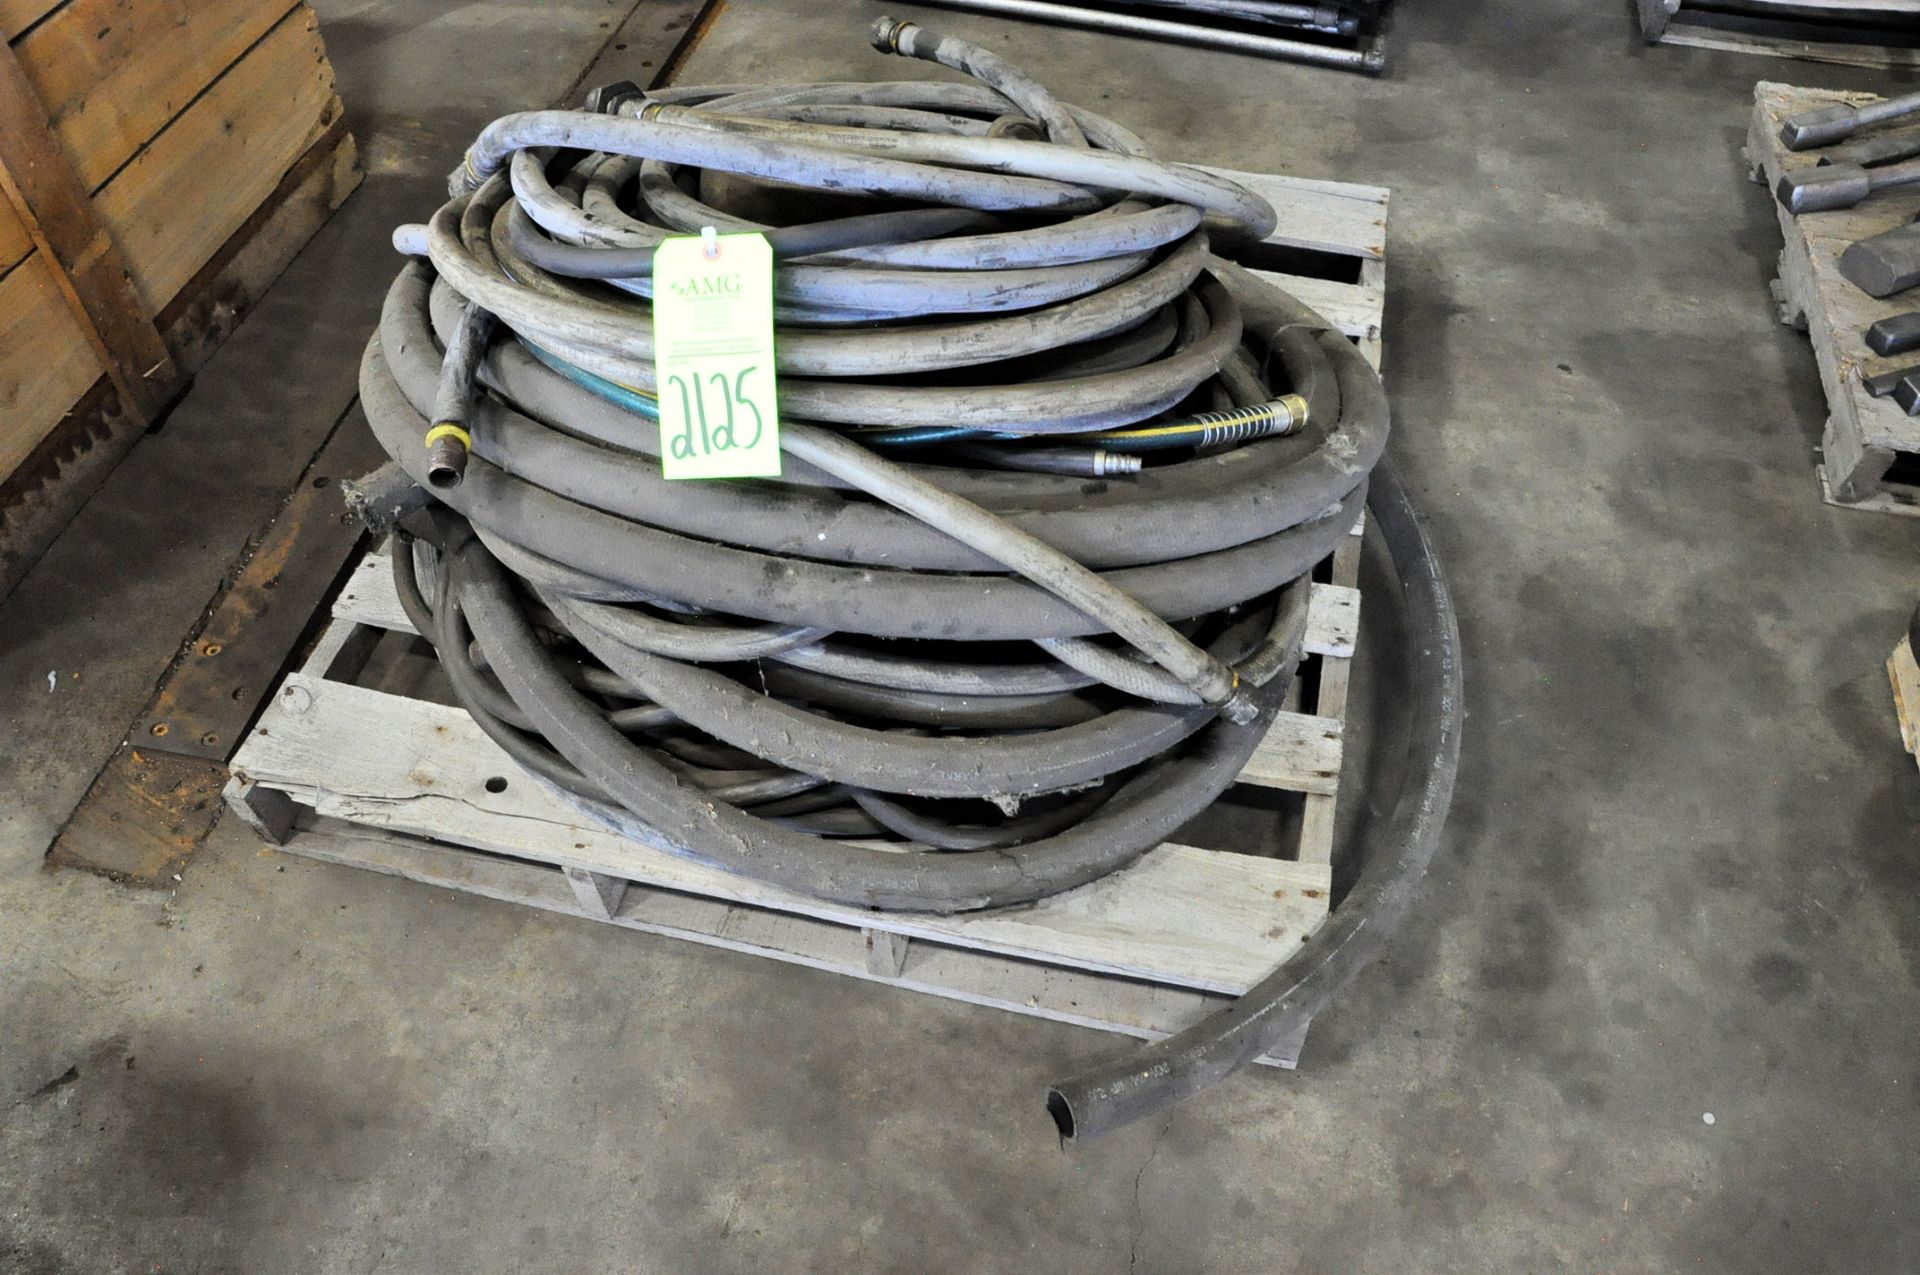 Lot-Unisorb Product, Hoses and Tarps in (2) Crates and (1) Pallet, (F-21), (Green Tag) - Image 2 of 3